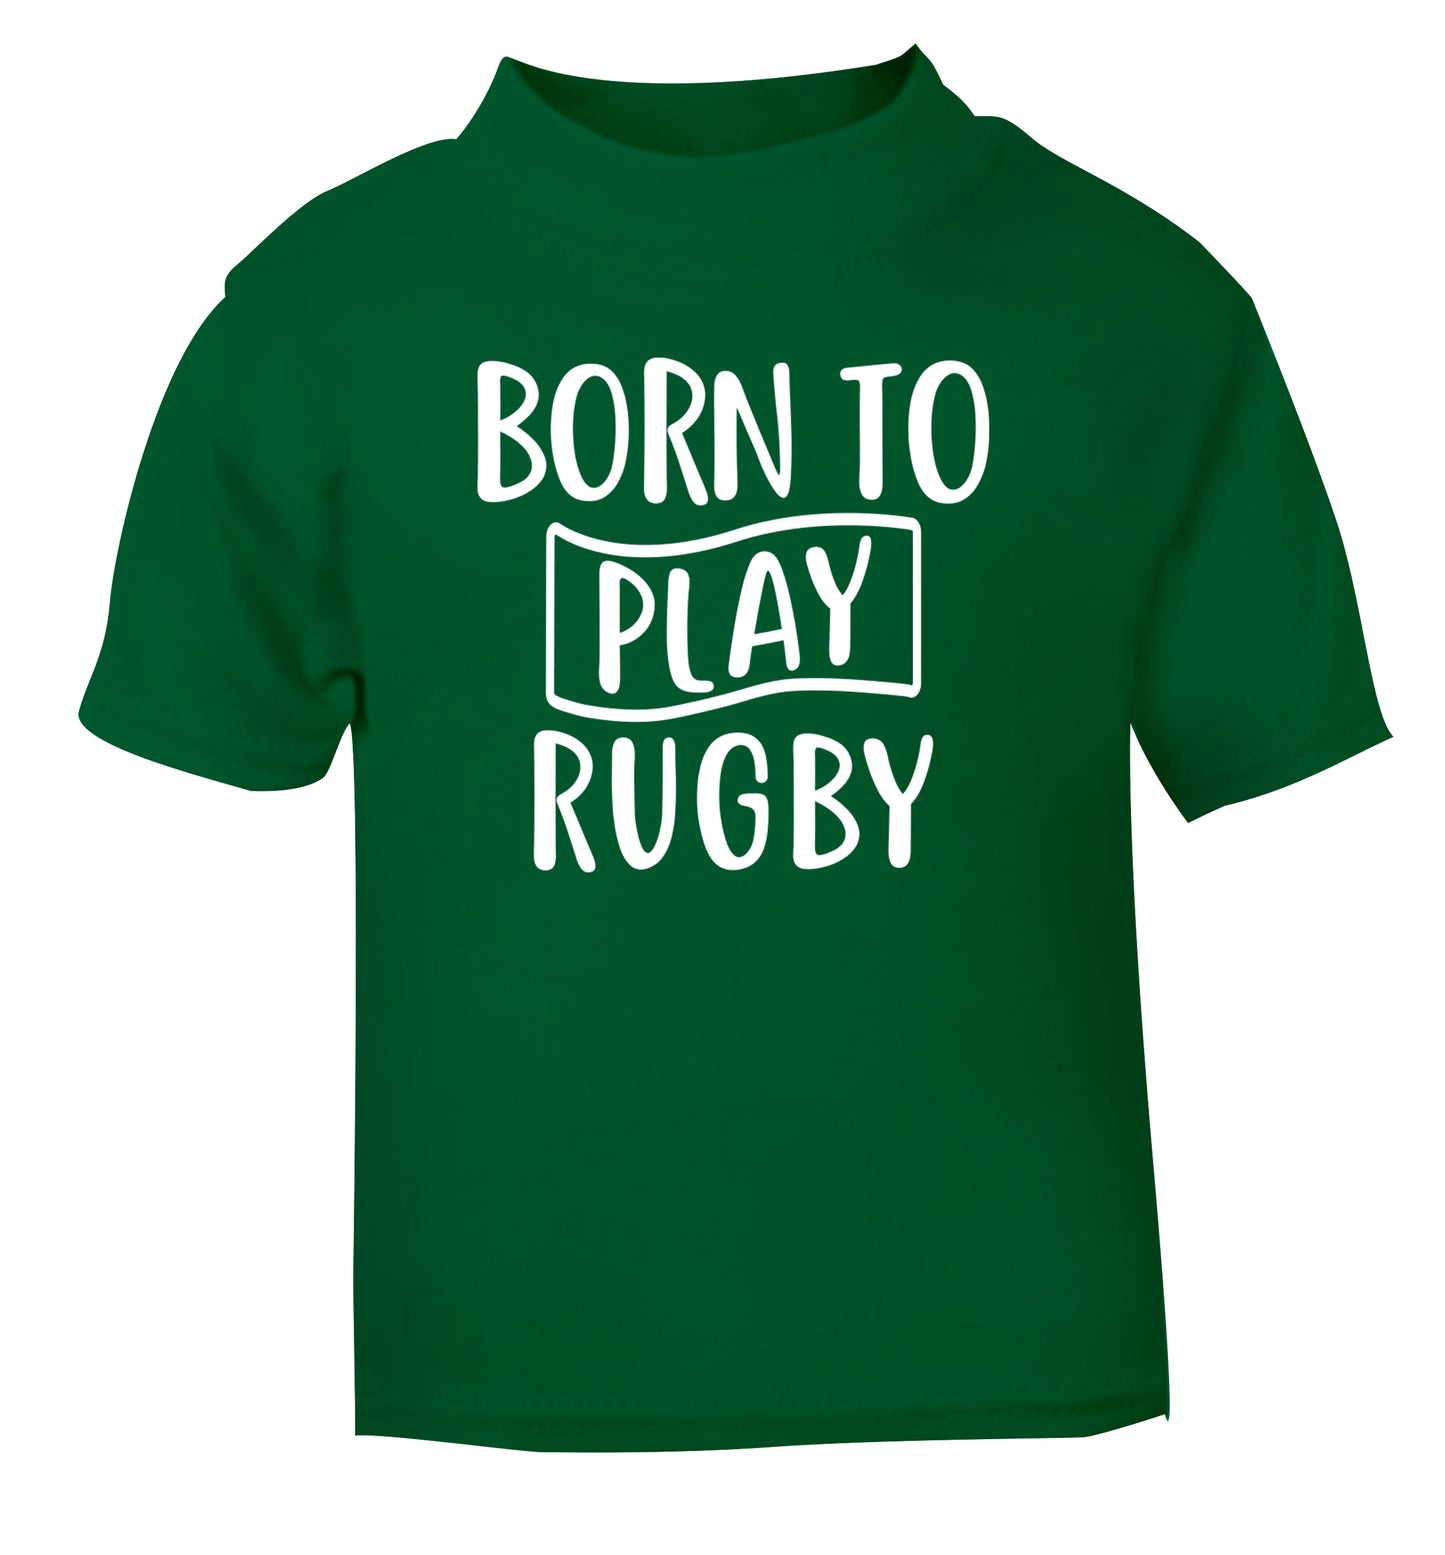 Born to play rugby green Baby Toddler Tshirt 2 Years